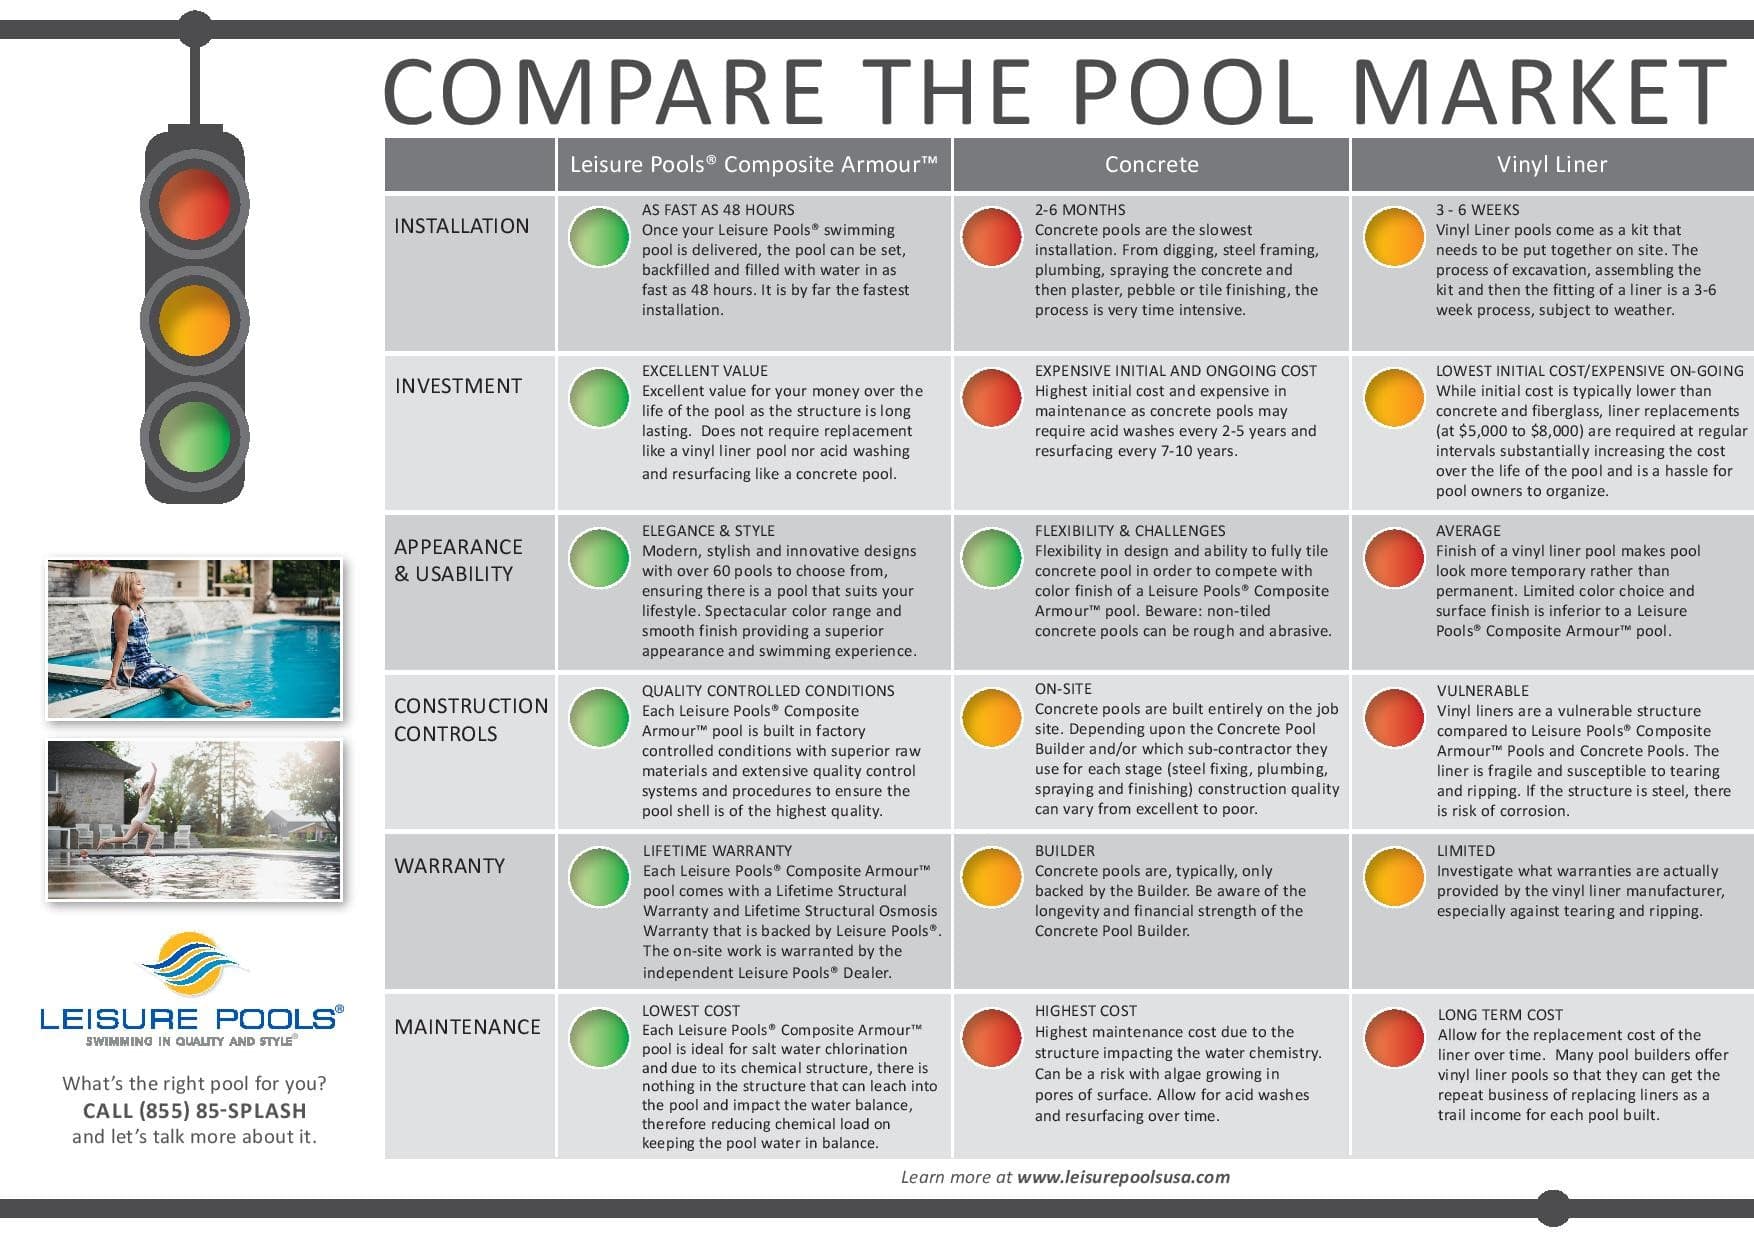 a comparison between concrete pools, vinyl liner pools and fiberglass pools from Leisure Pools